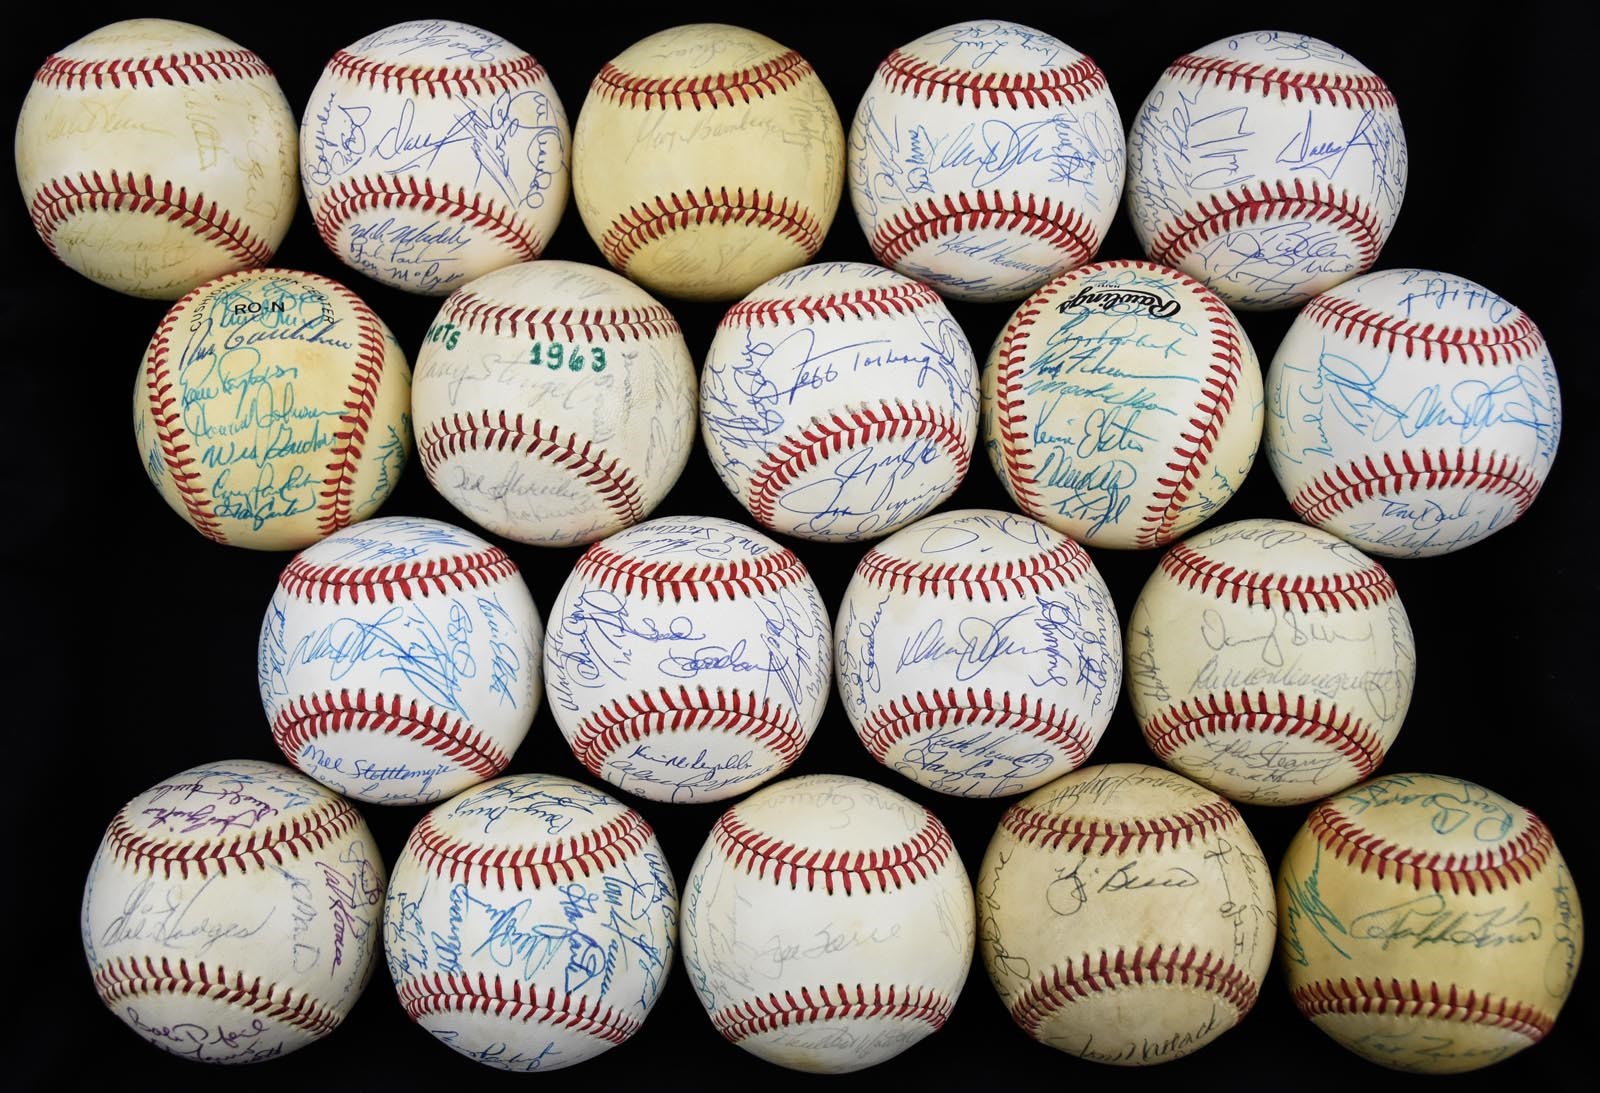 - 1963-95 New York Mets Team Signed Baseball Partial Run w/1969 & 1986 World Champs (19)